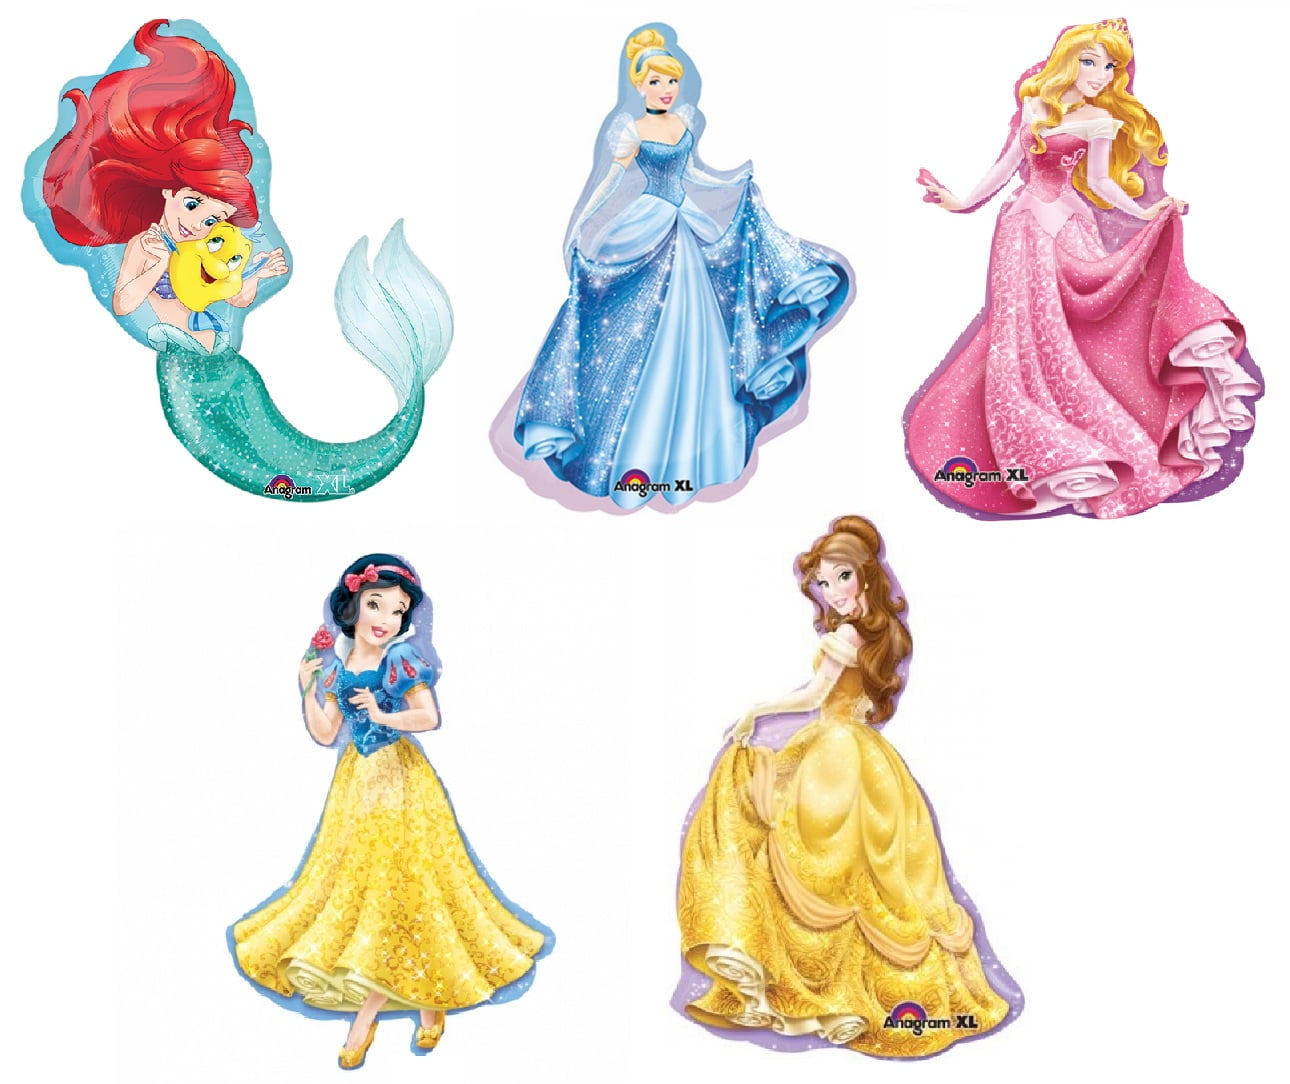 Disneys Princess Collection Sticker Album & Sticker Packs New and Unused  Featuring Snow White, Cinderella and Sleeping Beauty 